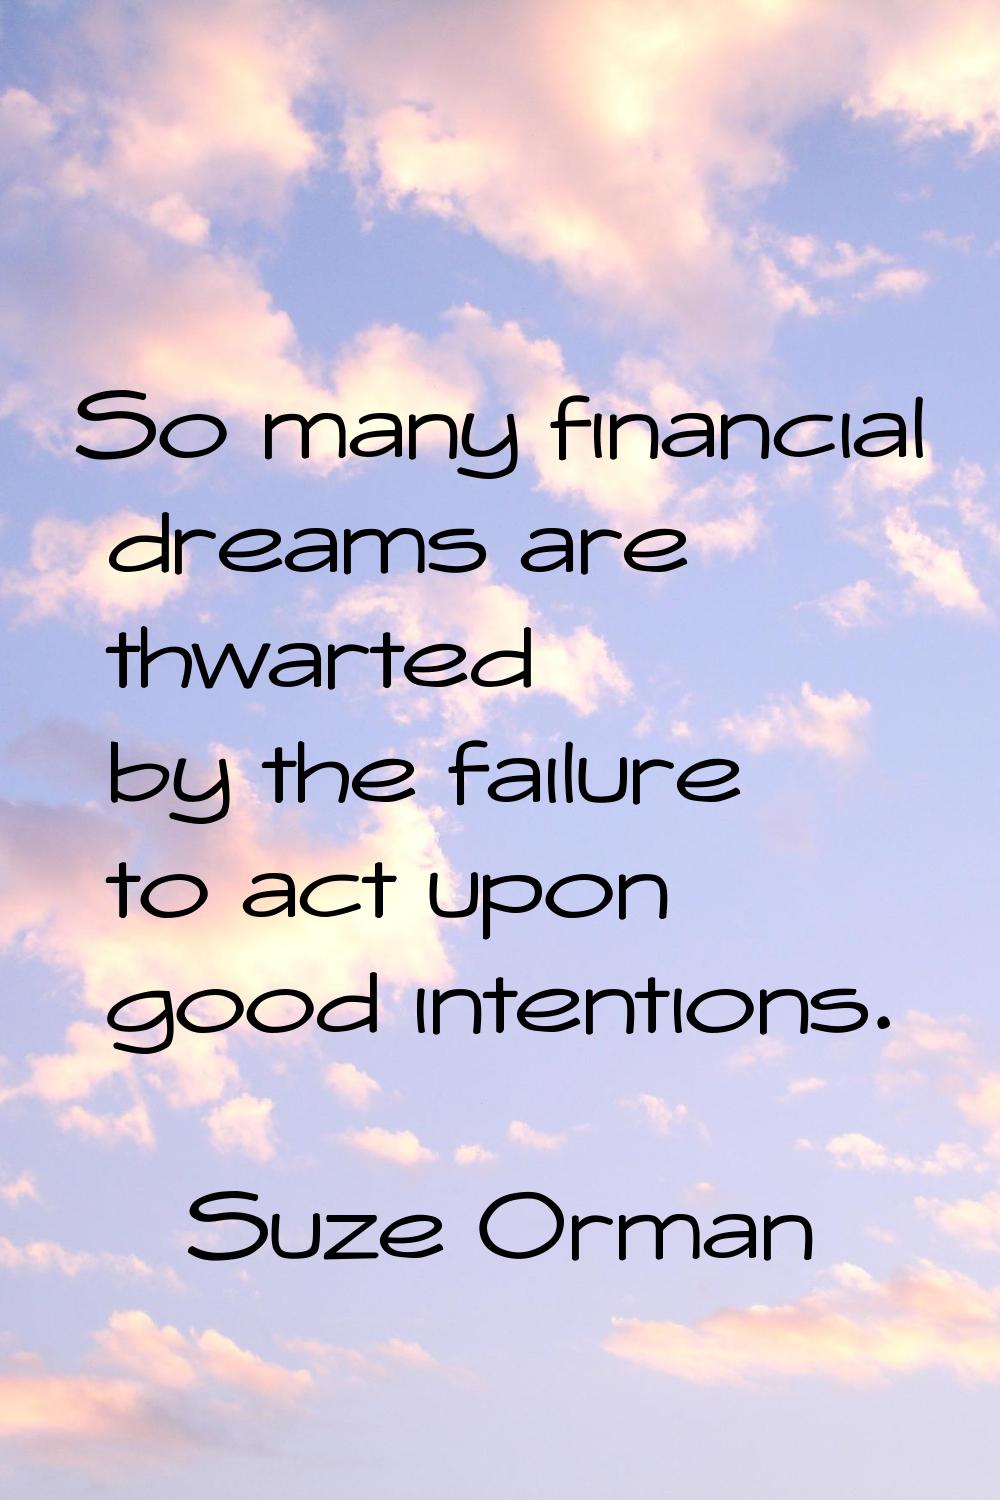 So many financial dreams are thwarted by the failure to act upon good intentions.